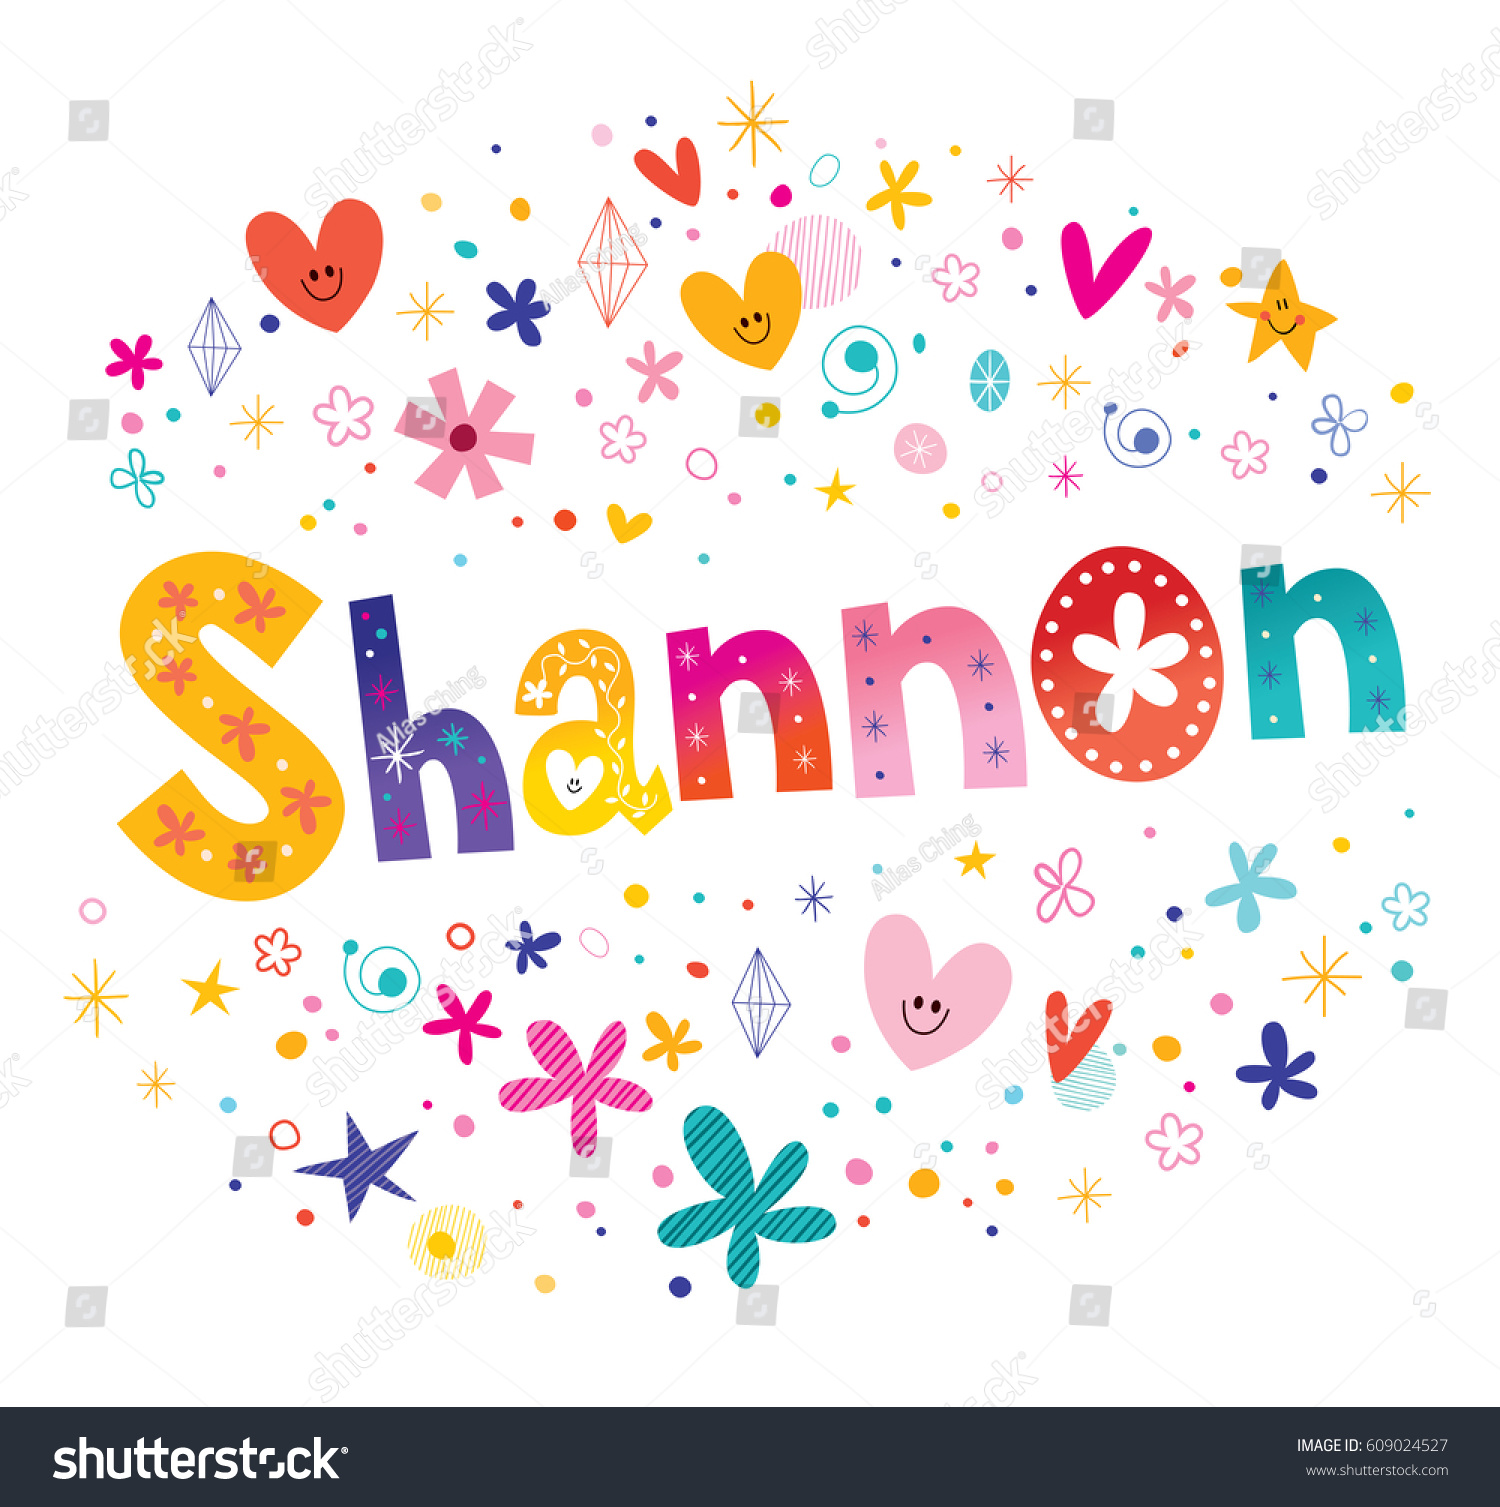 13 Shannon name Images, Stock Photos & Vectors | Shutterstock